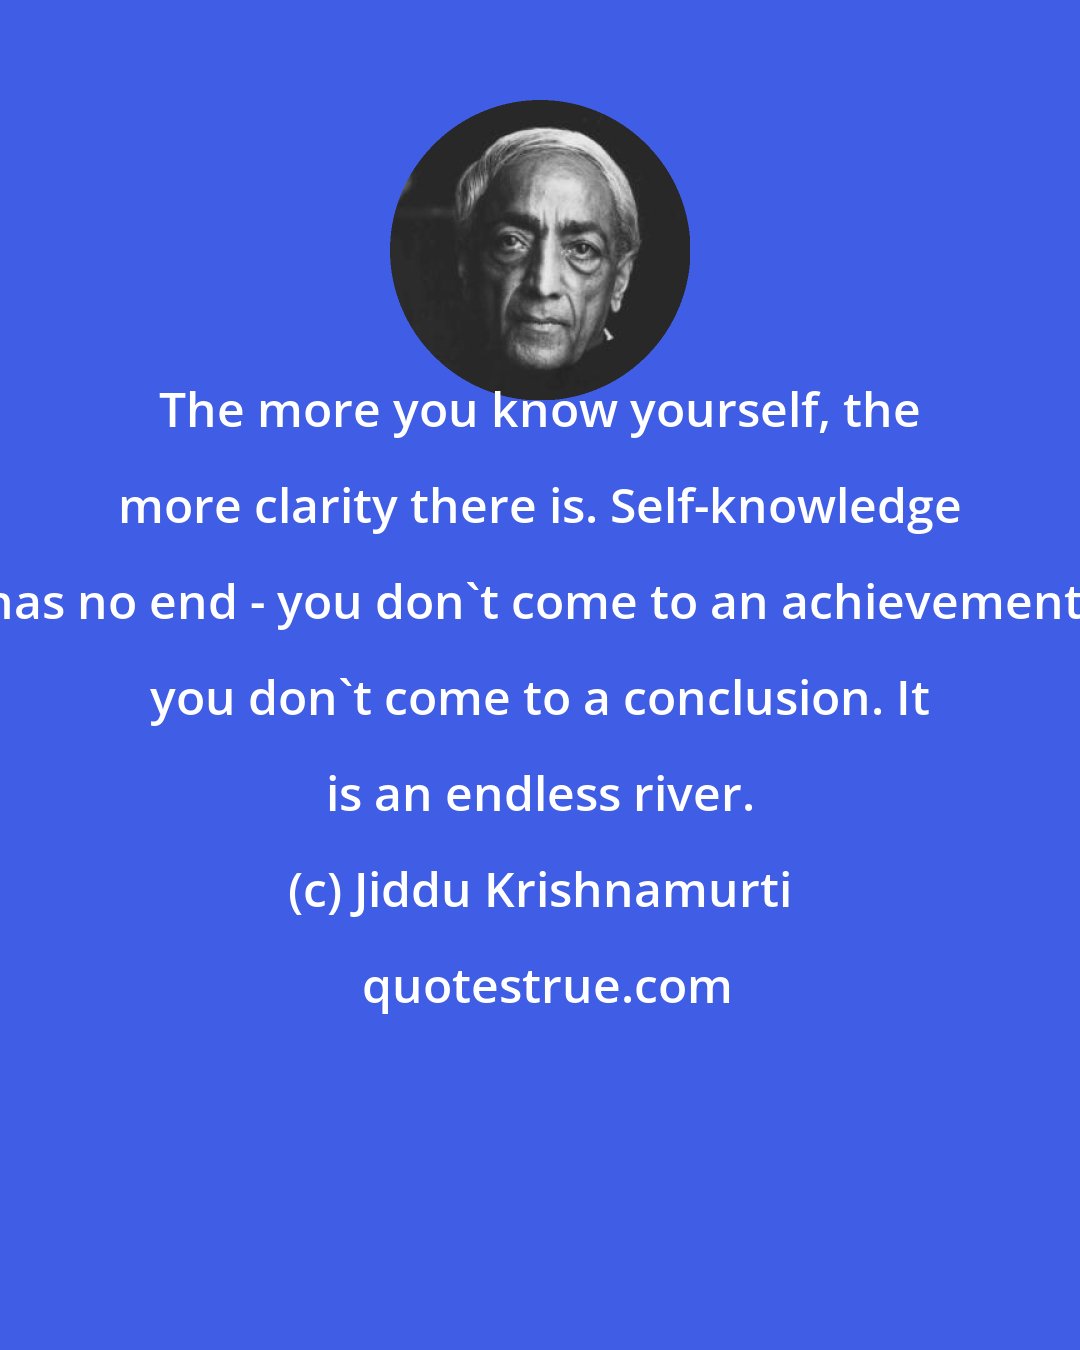 Jiddu Krishnamurti: The more you know yourself, the more clarity there is. Self-knowledge has no end - you don't come to an achievement, you don't come to a conclusion. It is an endless river.